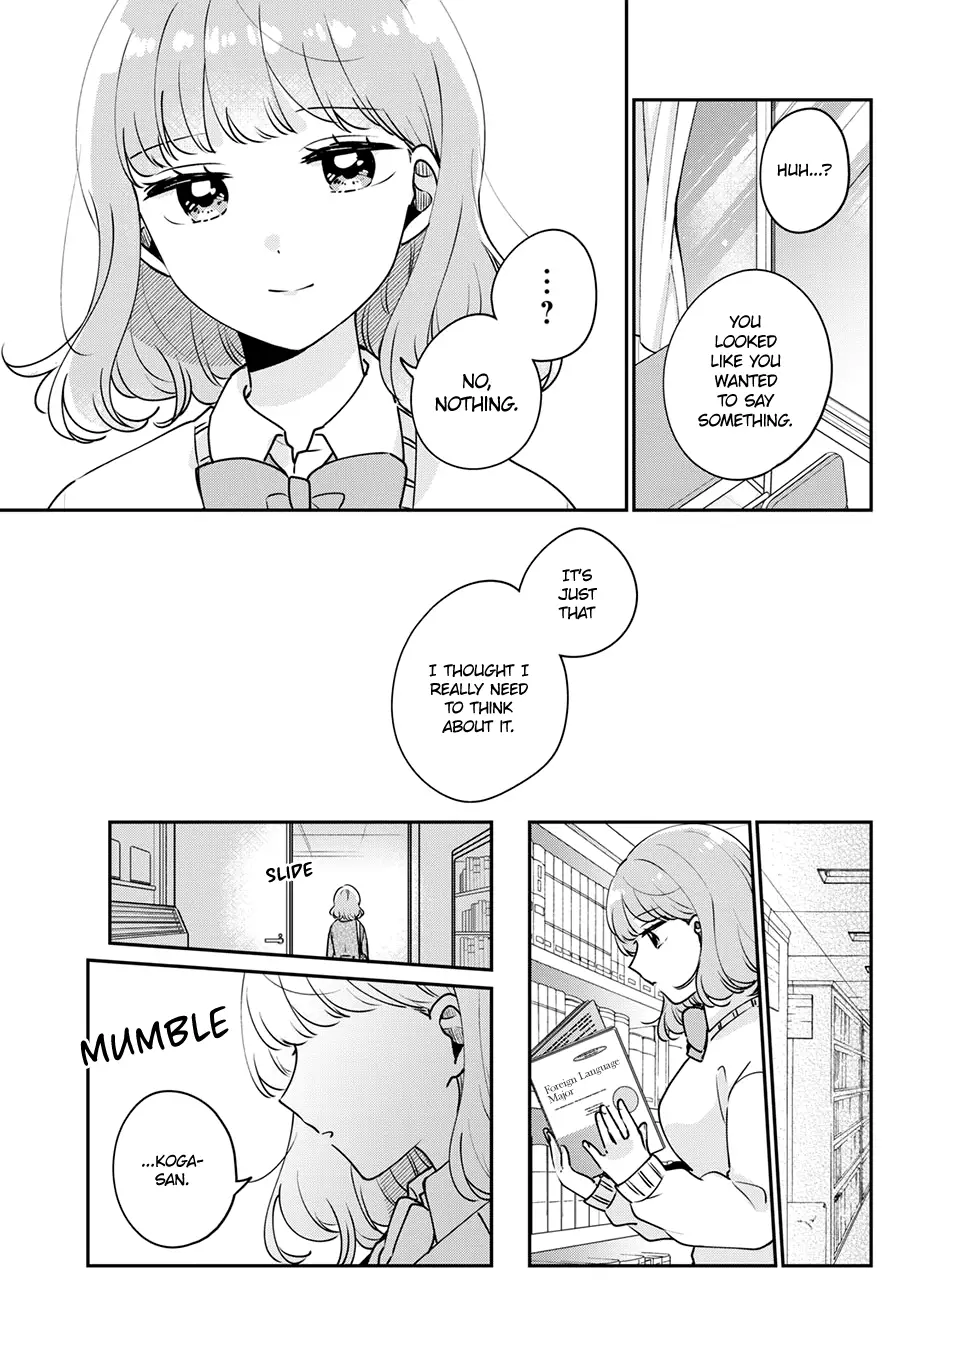 It's Not Meguro-San's First Time - 40 page 10